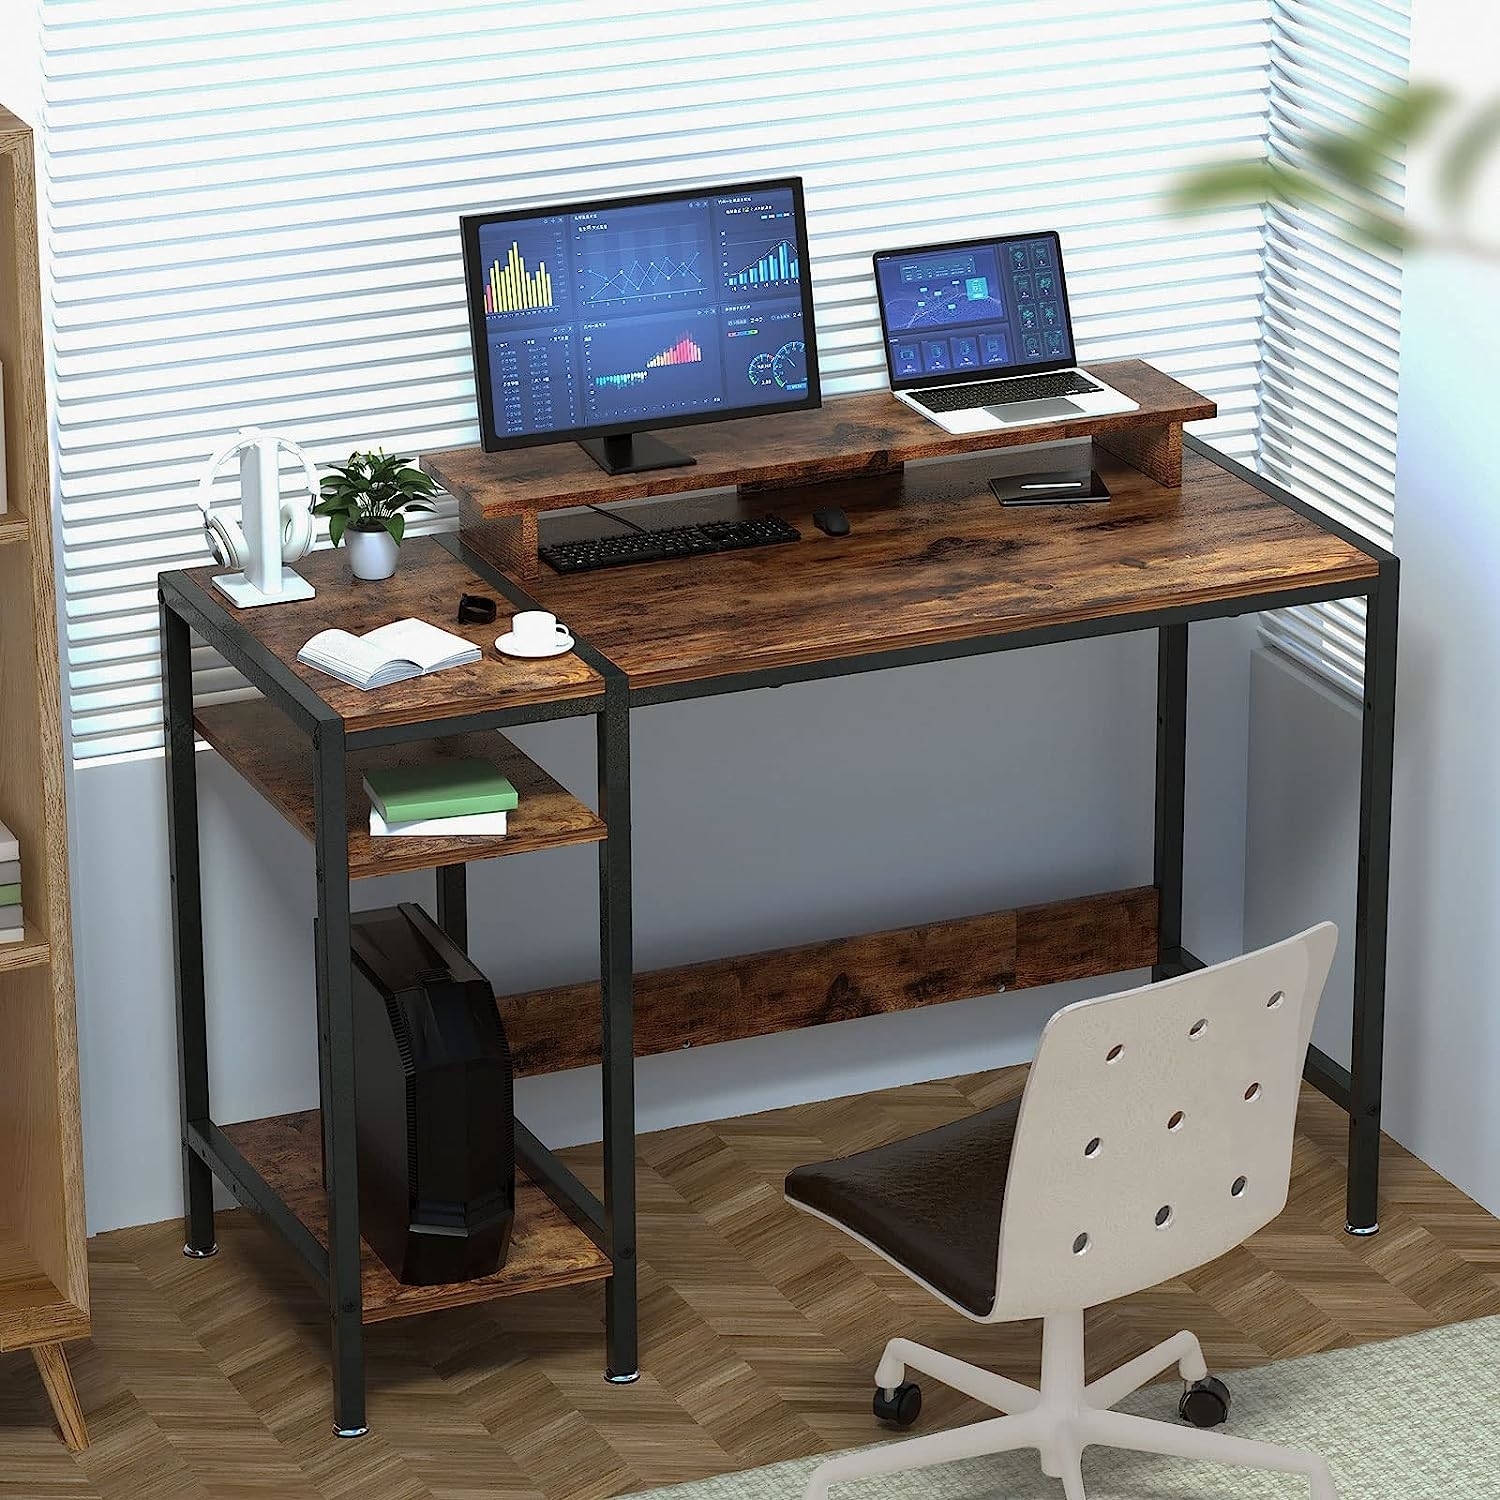 The desk in a rustic brown color